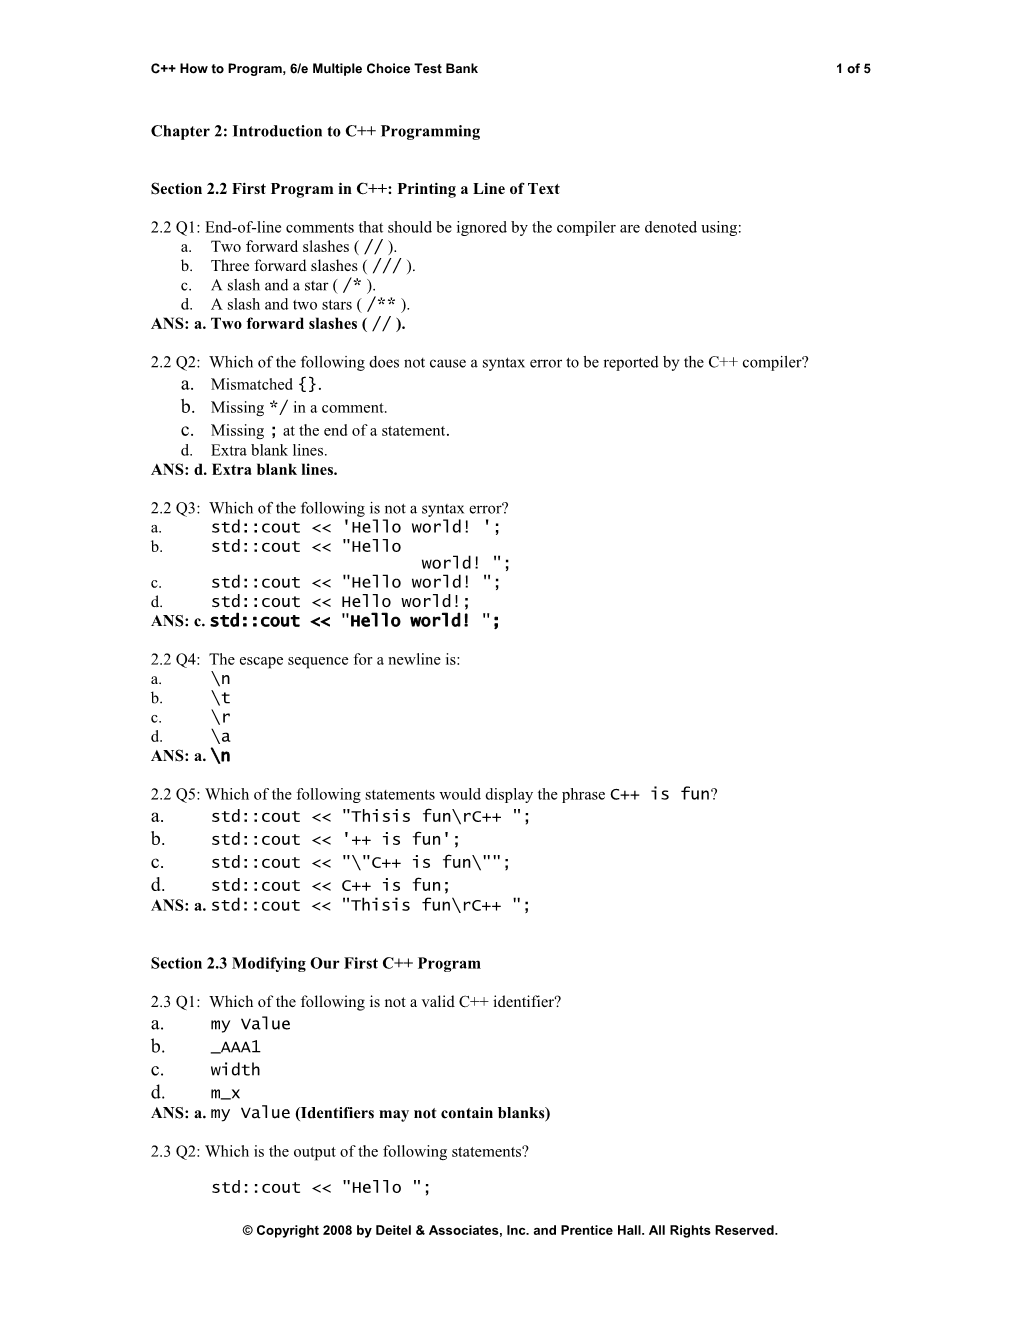 C How to Program, 6/E Multiple Choice Test Bank1 of 5